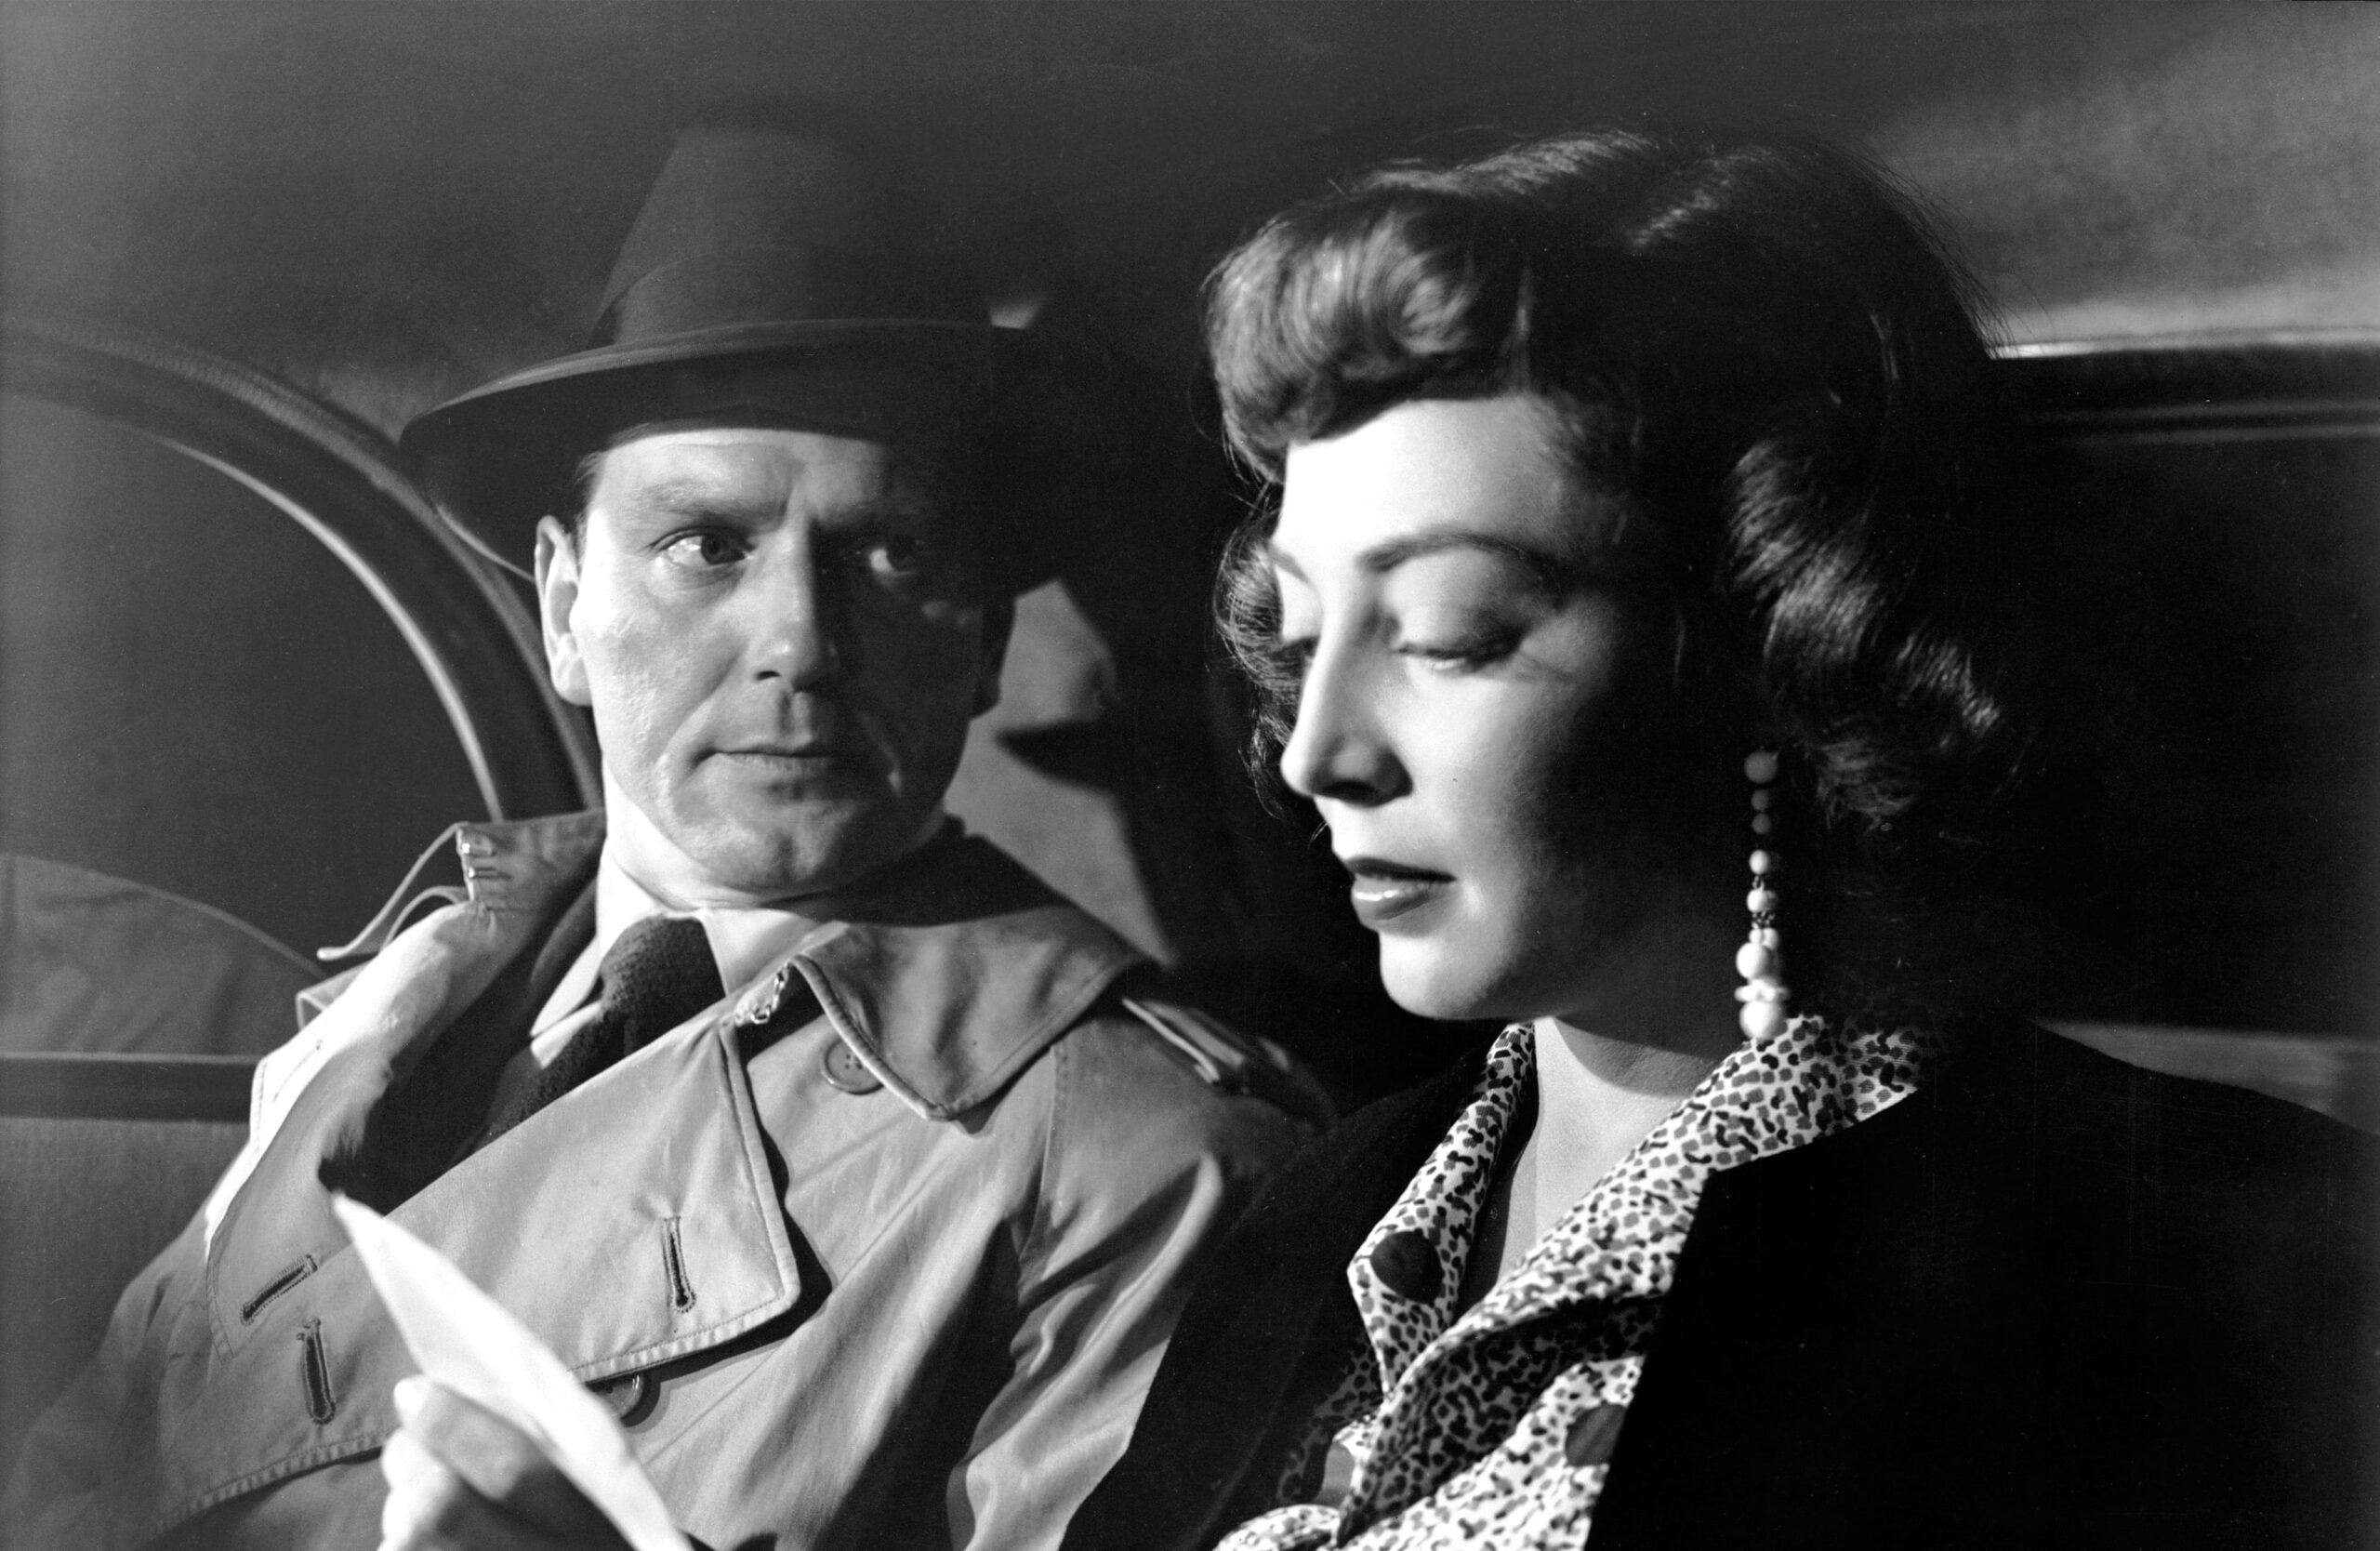 Charles McGraw and Marie Windsor